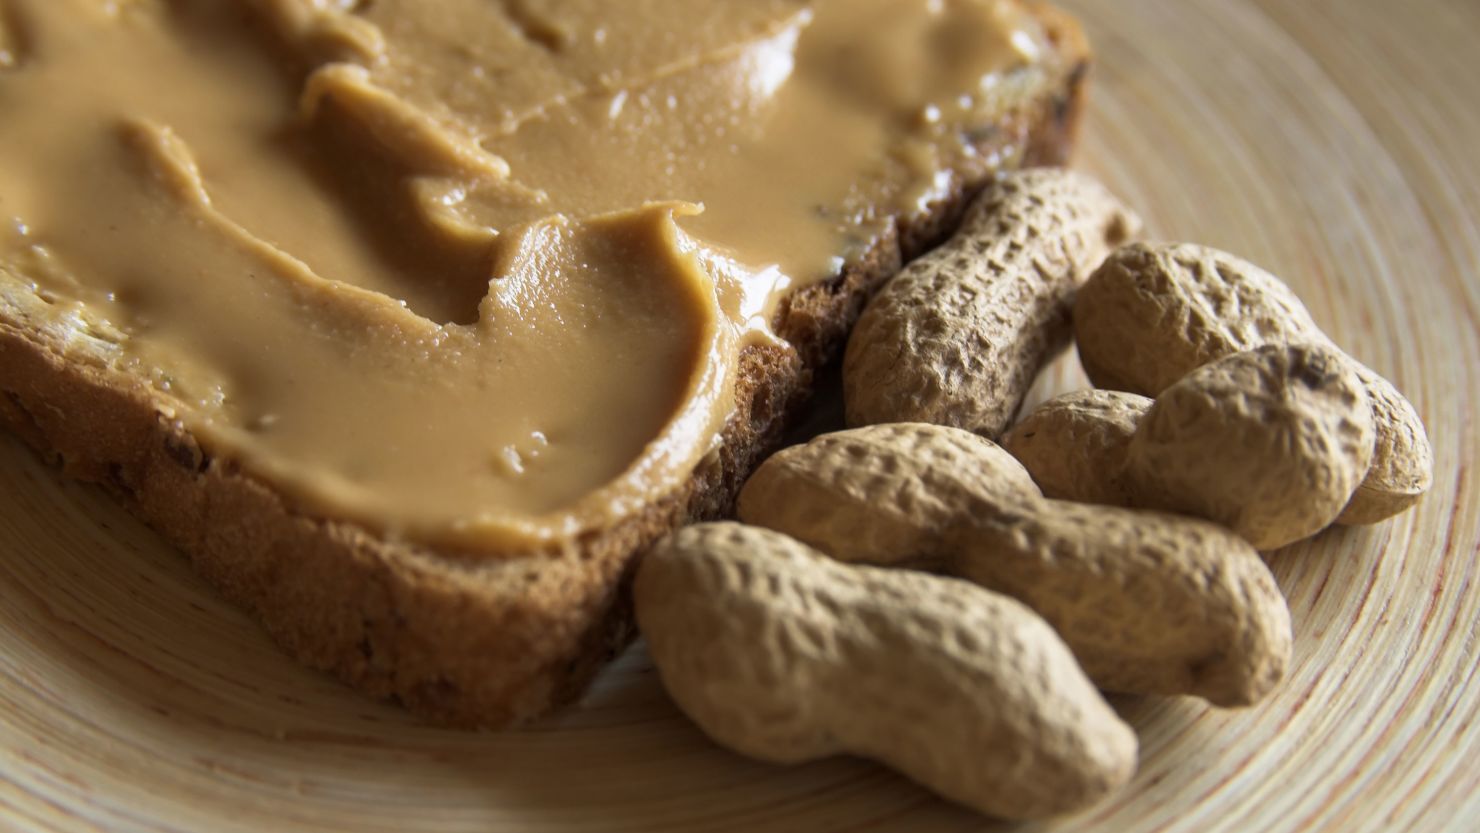 An estimated 2.5% of US children may have peanut allergies, and only about 20% will eventually outgrow them.